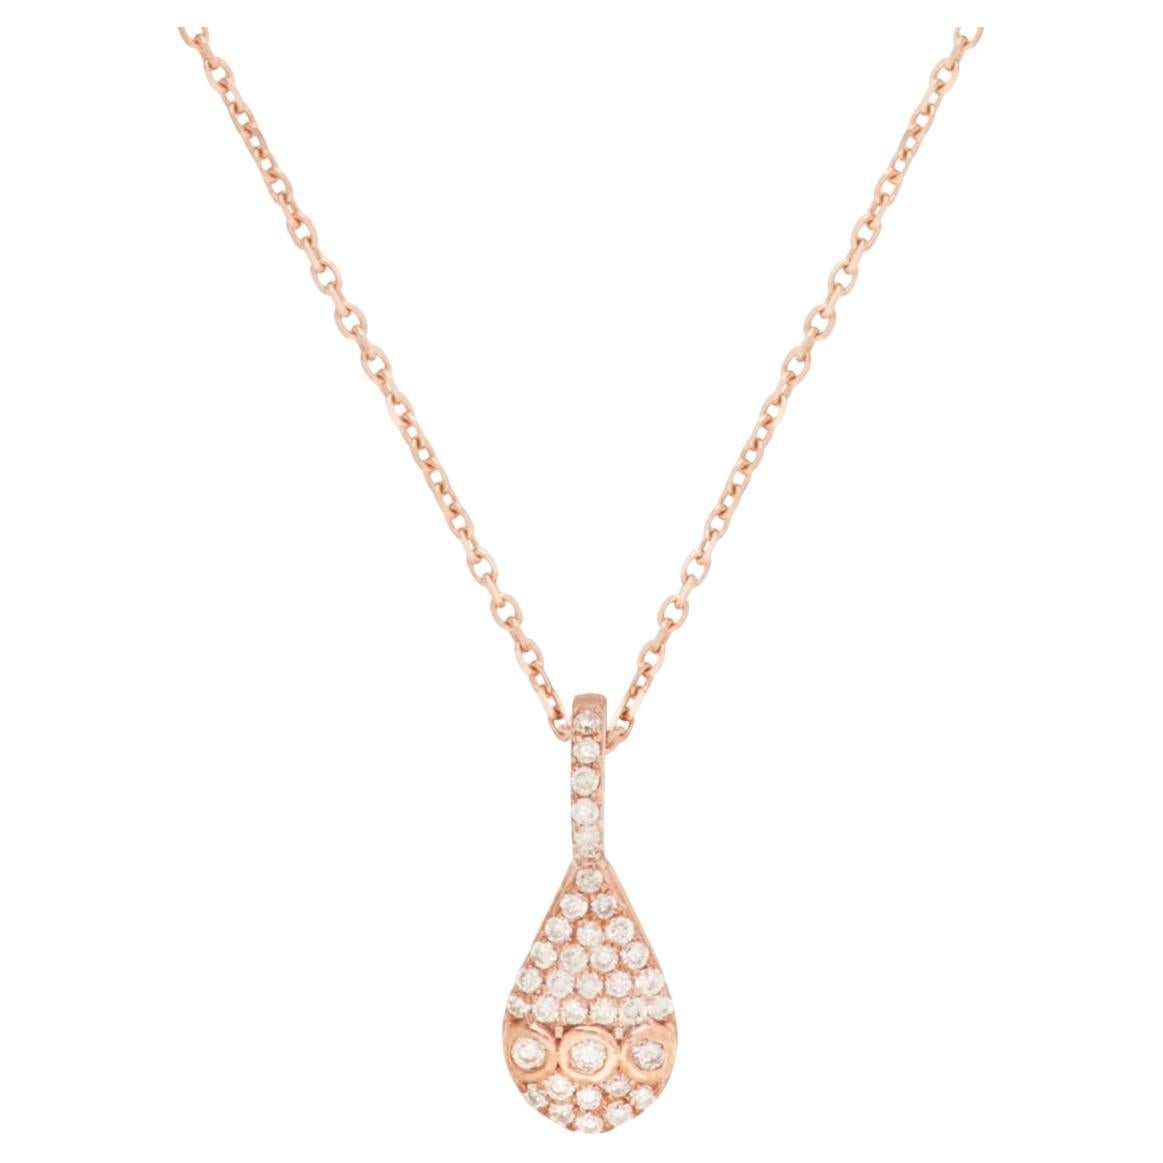 18k rose gold necklace with champagne infused diamond pavé drop pendant For Sale